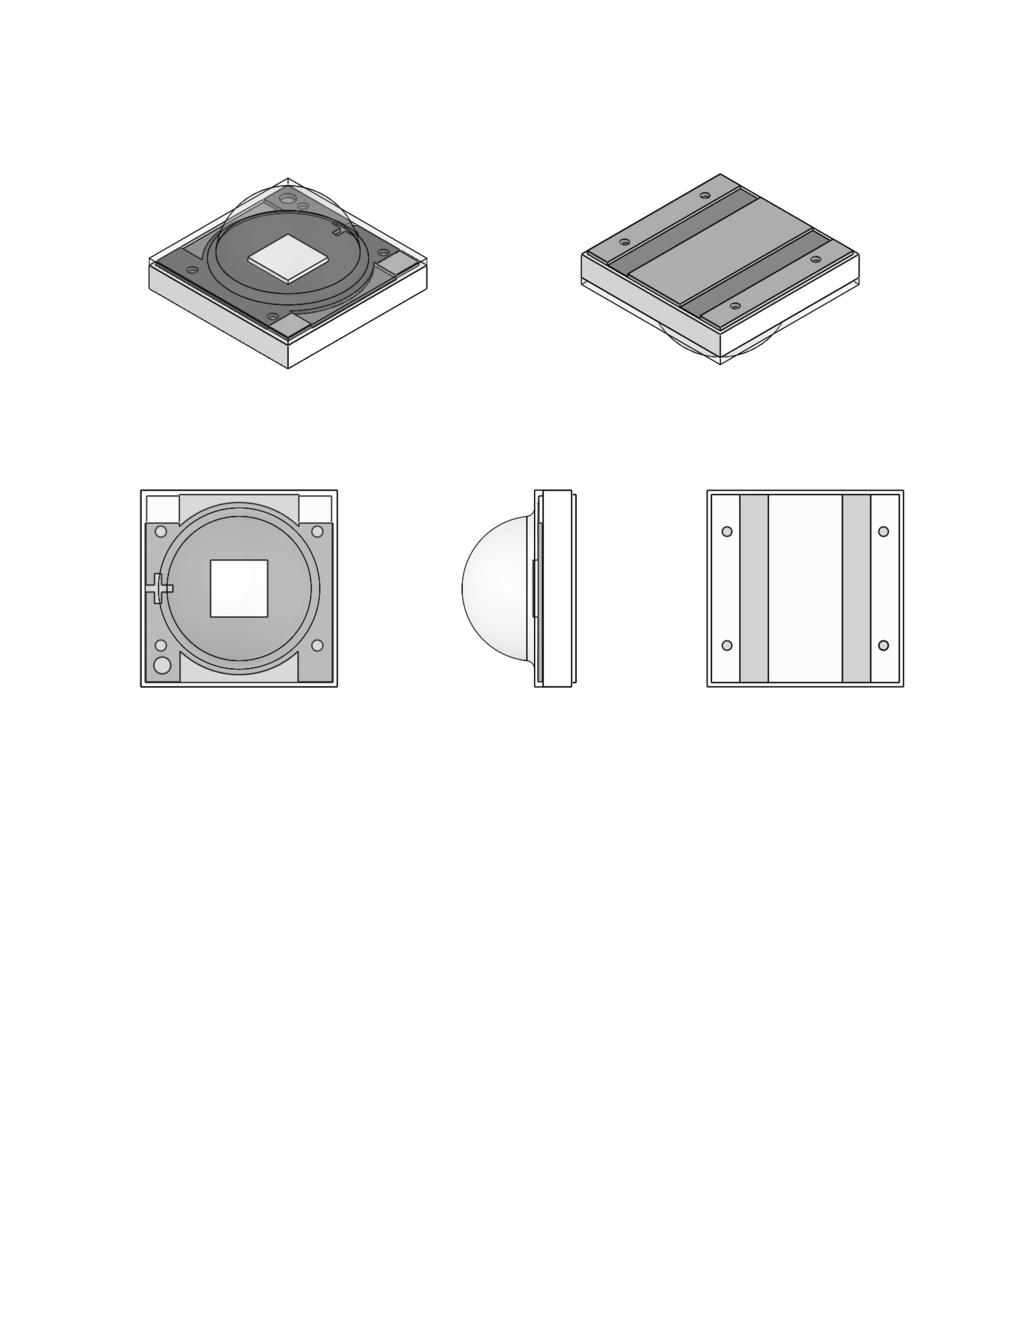 Mechanical Dimensions (T A = 25 C) All measurements are ±.13 mm unless otherwise indicated. 3.45 2. 3.3.73 2.3.5 3.45 2.6 1.3.5 Top View Side View Bottom View.